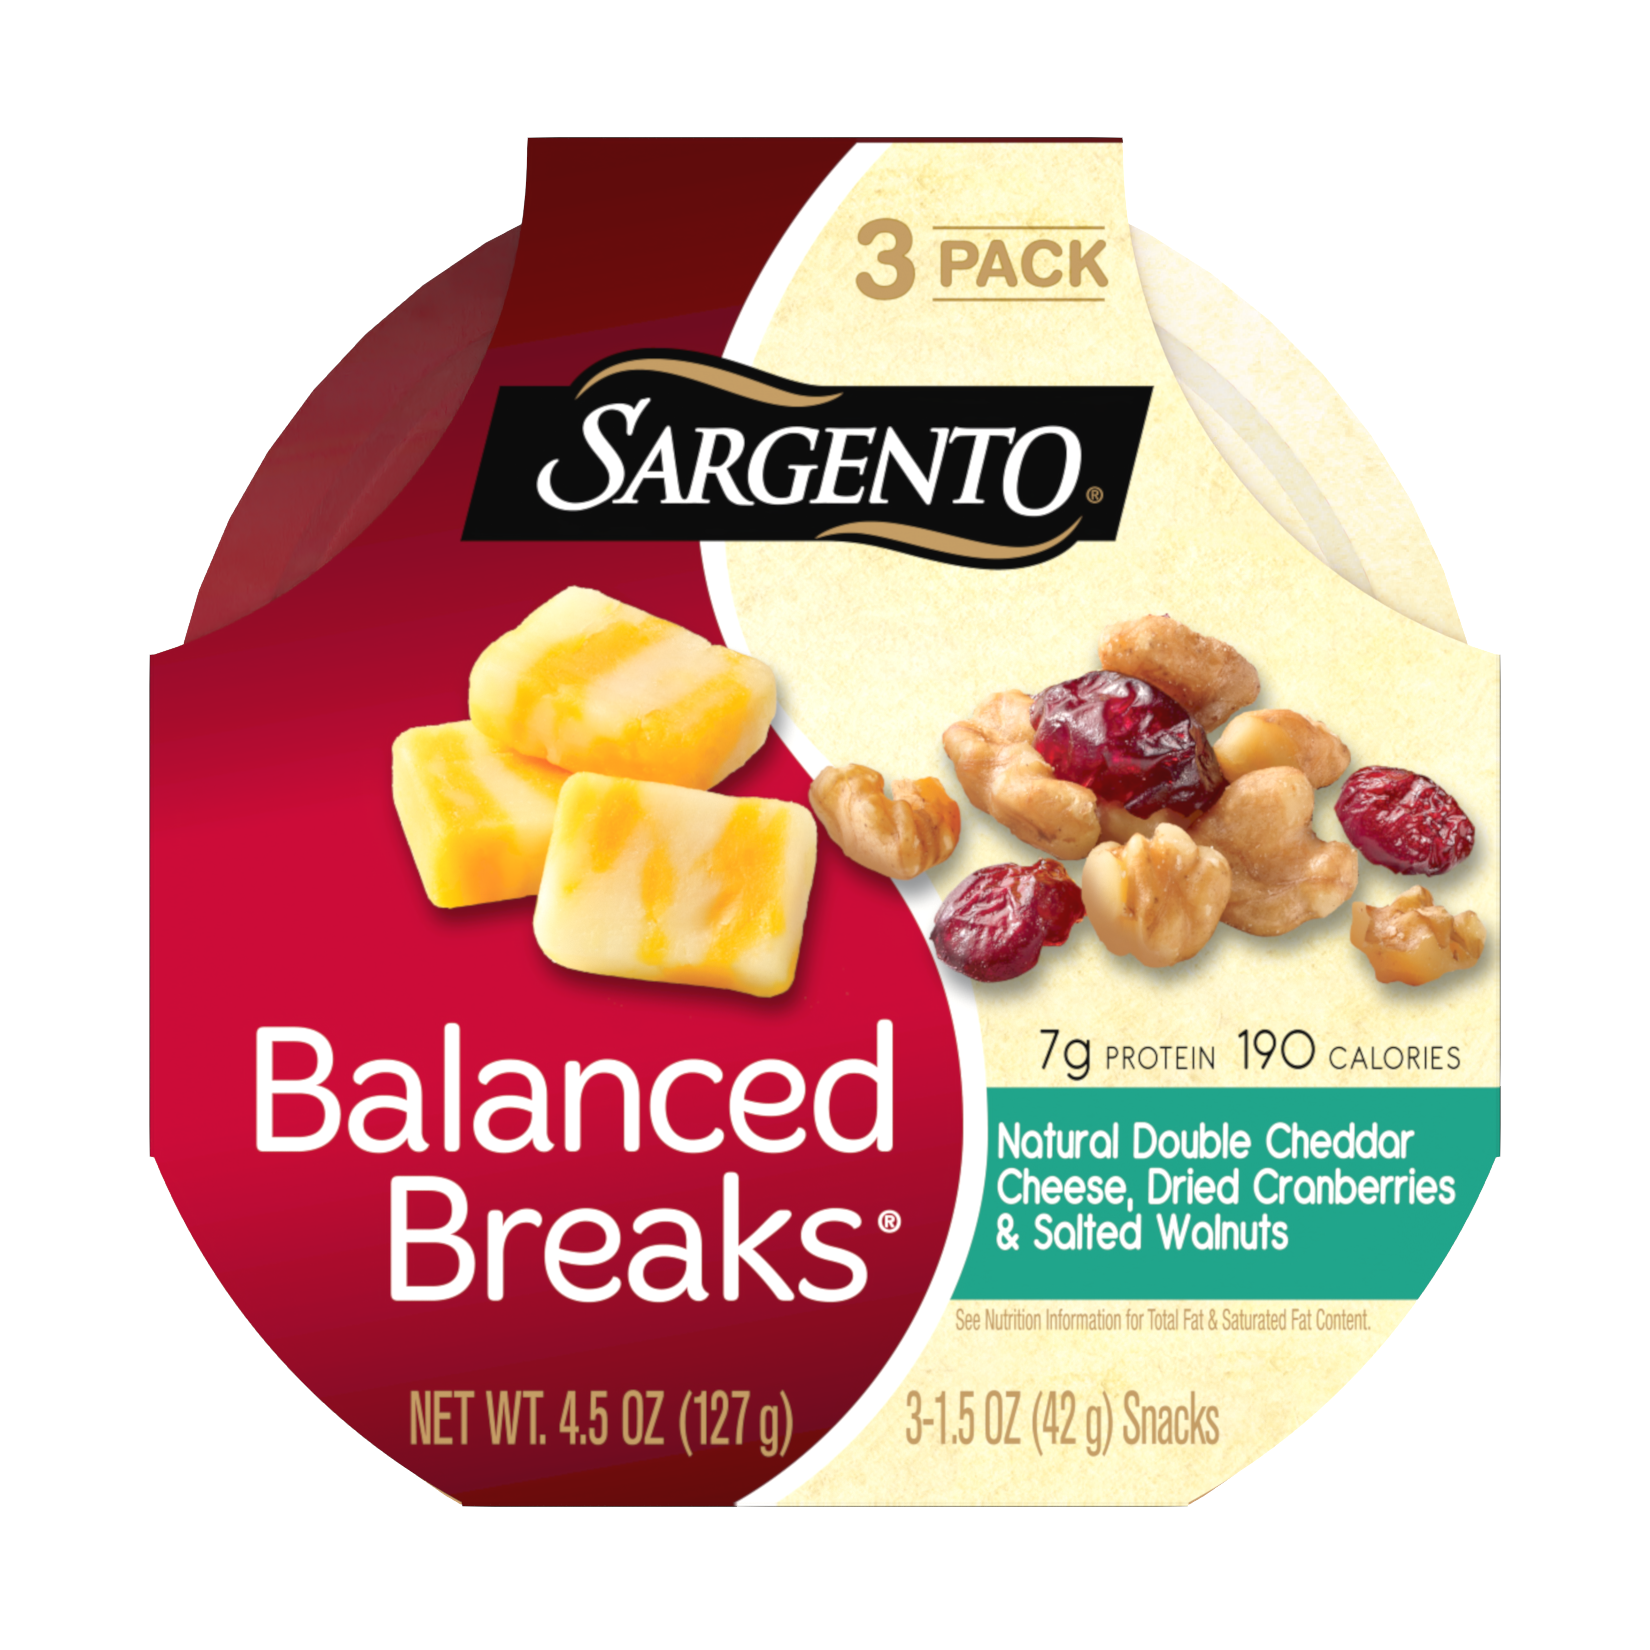 Sargento® Balanced Breaks®, Natural Double Cheddar Cheese, Dried Cranberries and Salted Walnuts